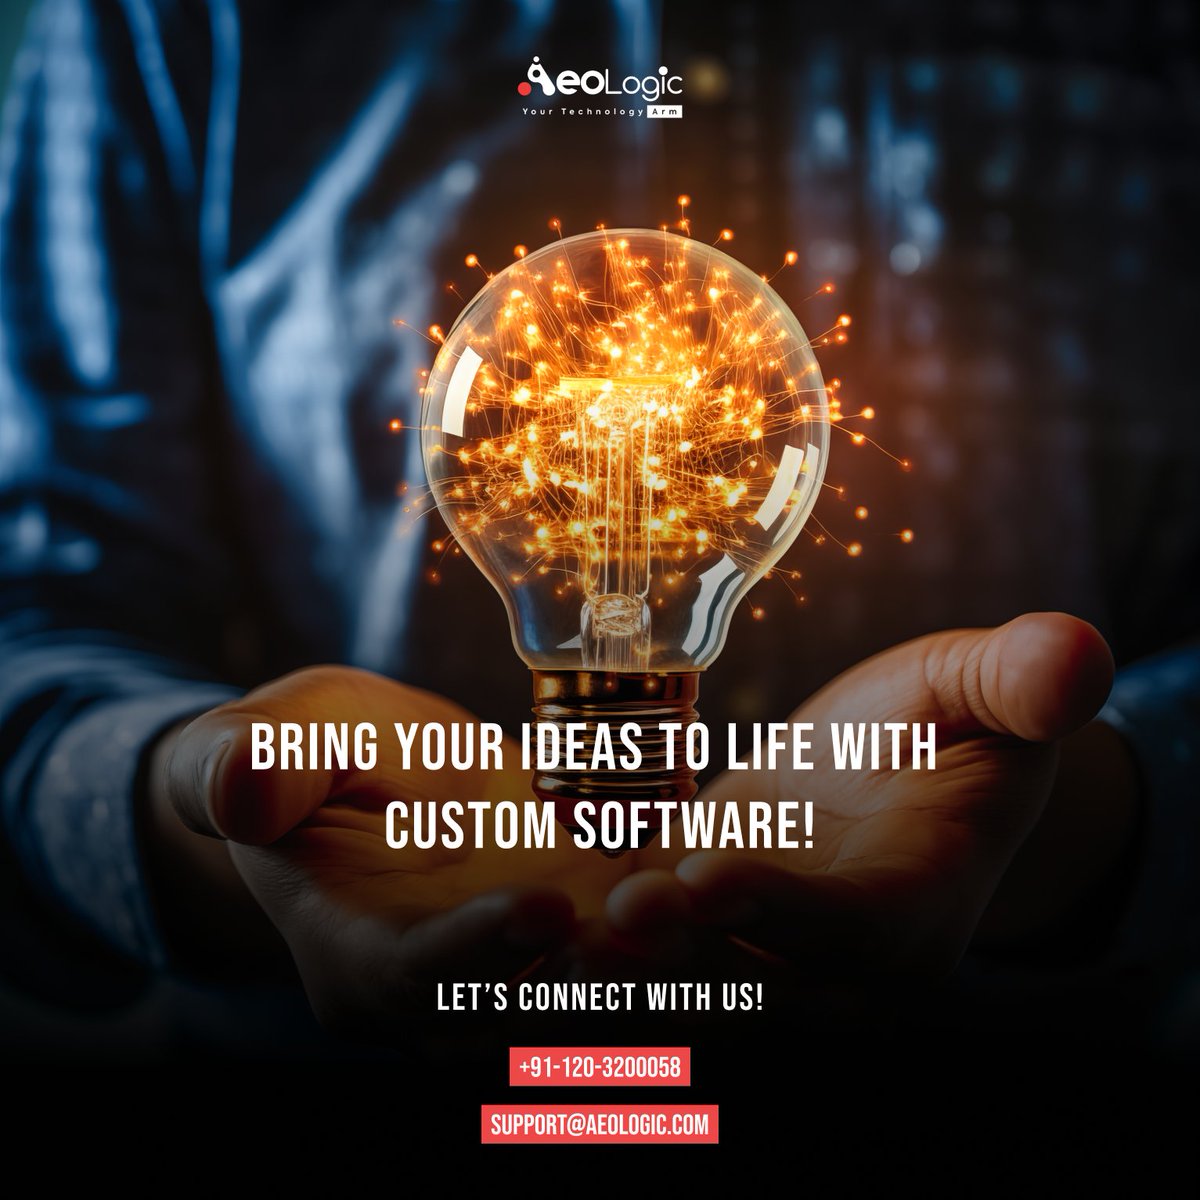 Bring Your Ideas to Life with Custom Software!   

Contact us at +91-120-3200058 or 📧 email us at support@aeologic.com to start your project today!

 #CustomSoftware #TechSolutions #AeologicTechnologies #InnovateWithUs #SoftwareDevelopment #DigitalTransformation